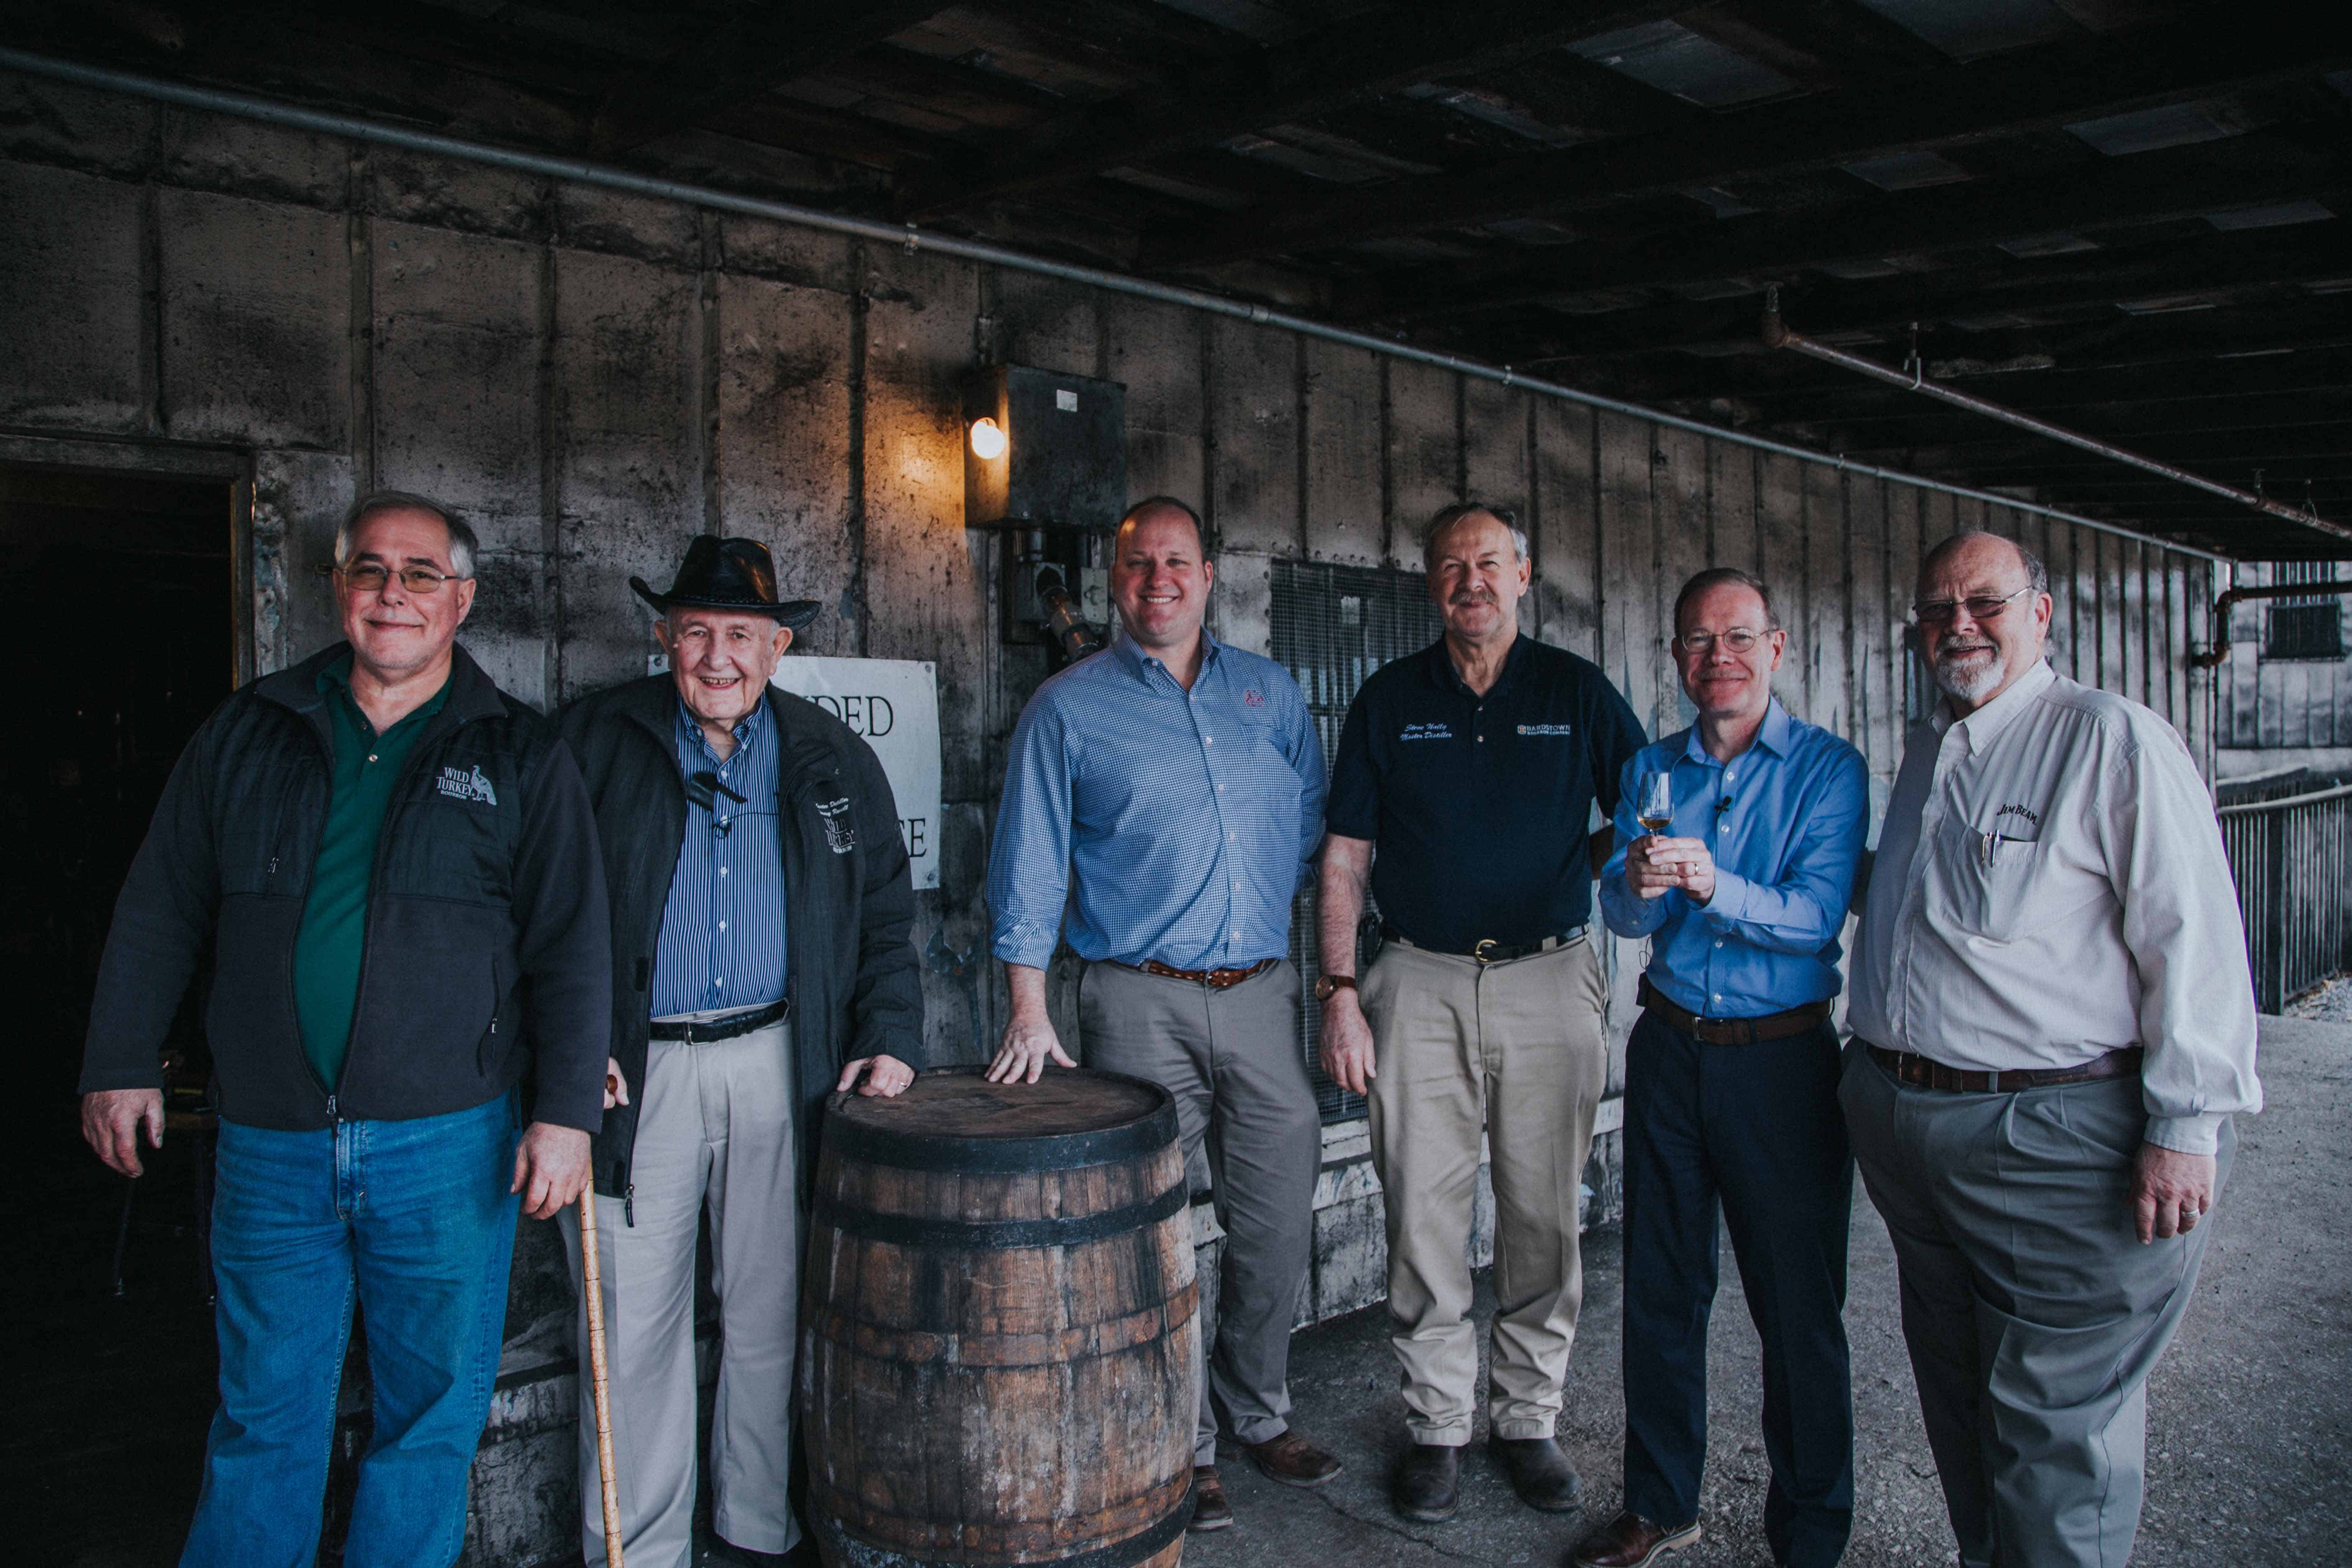 Angels Fare WT Group Photo - Kentucky Bourbon Affair™ To Feature Exclusive Private Barrel Picks By Panel Of Legendary Hall of Fame Master Distillers